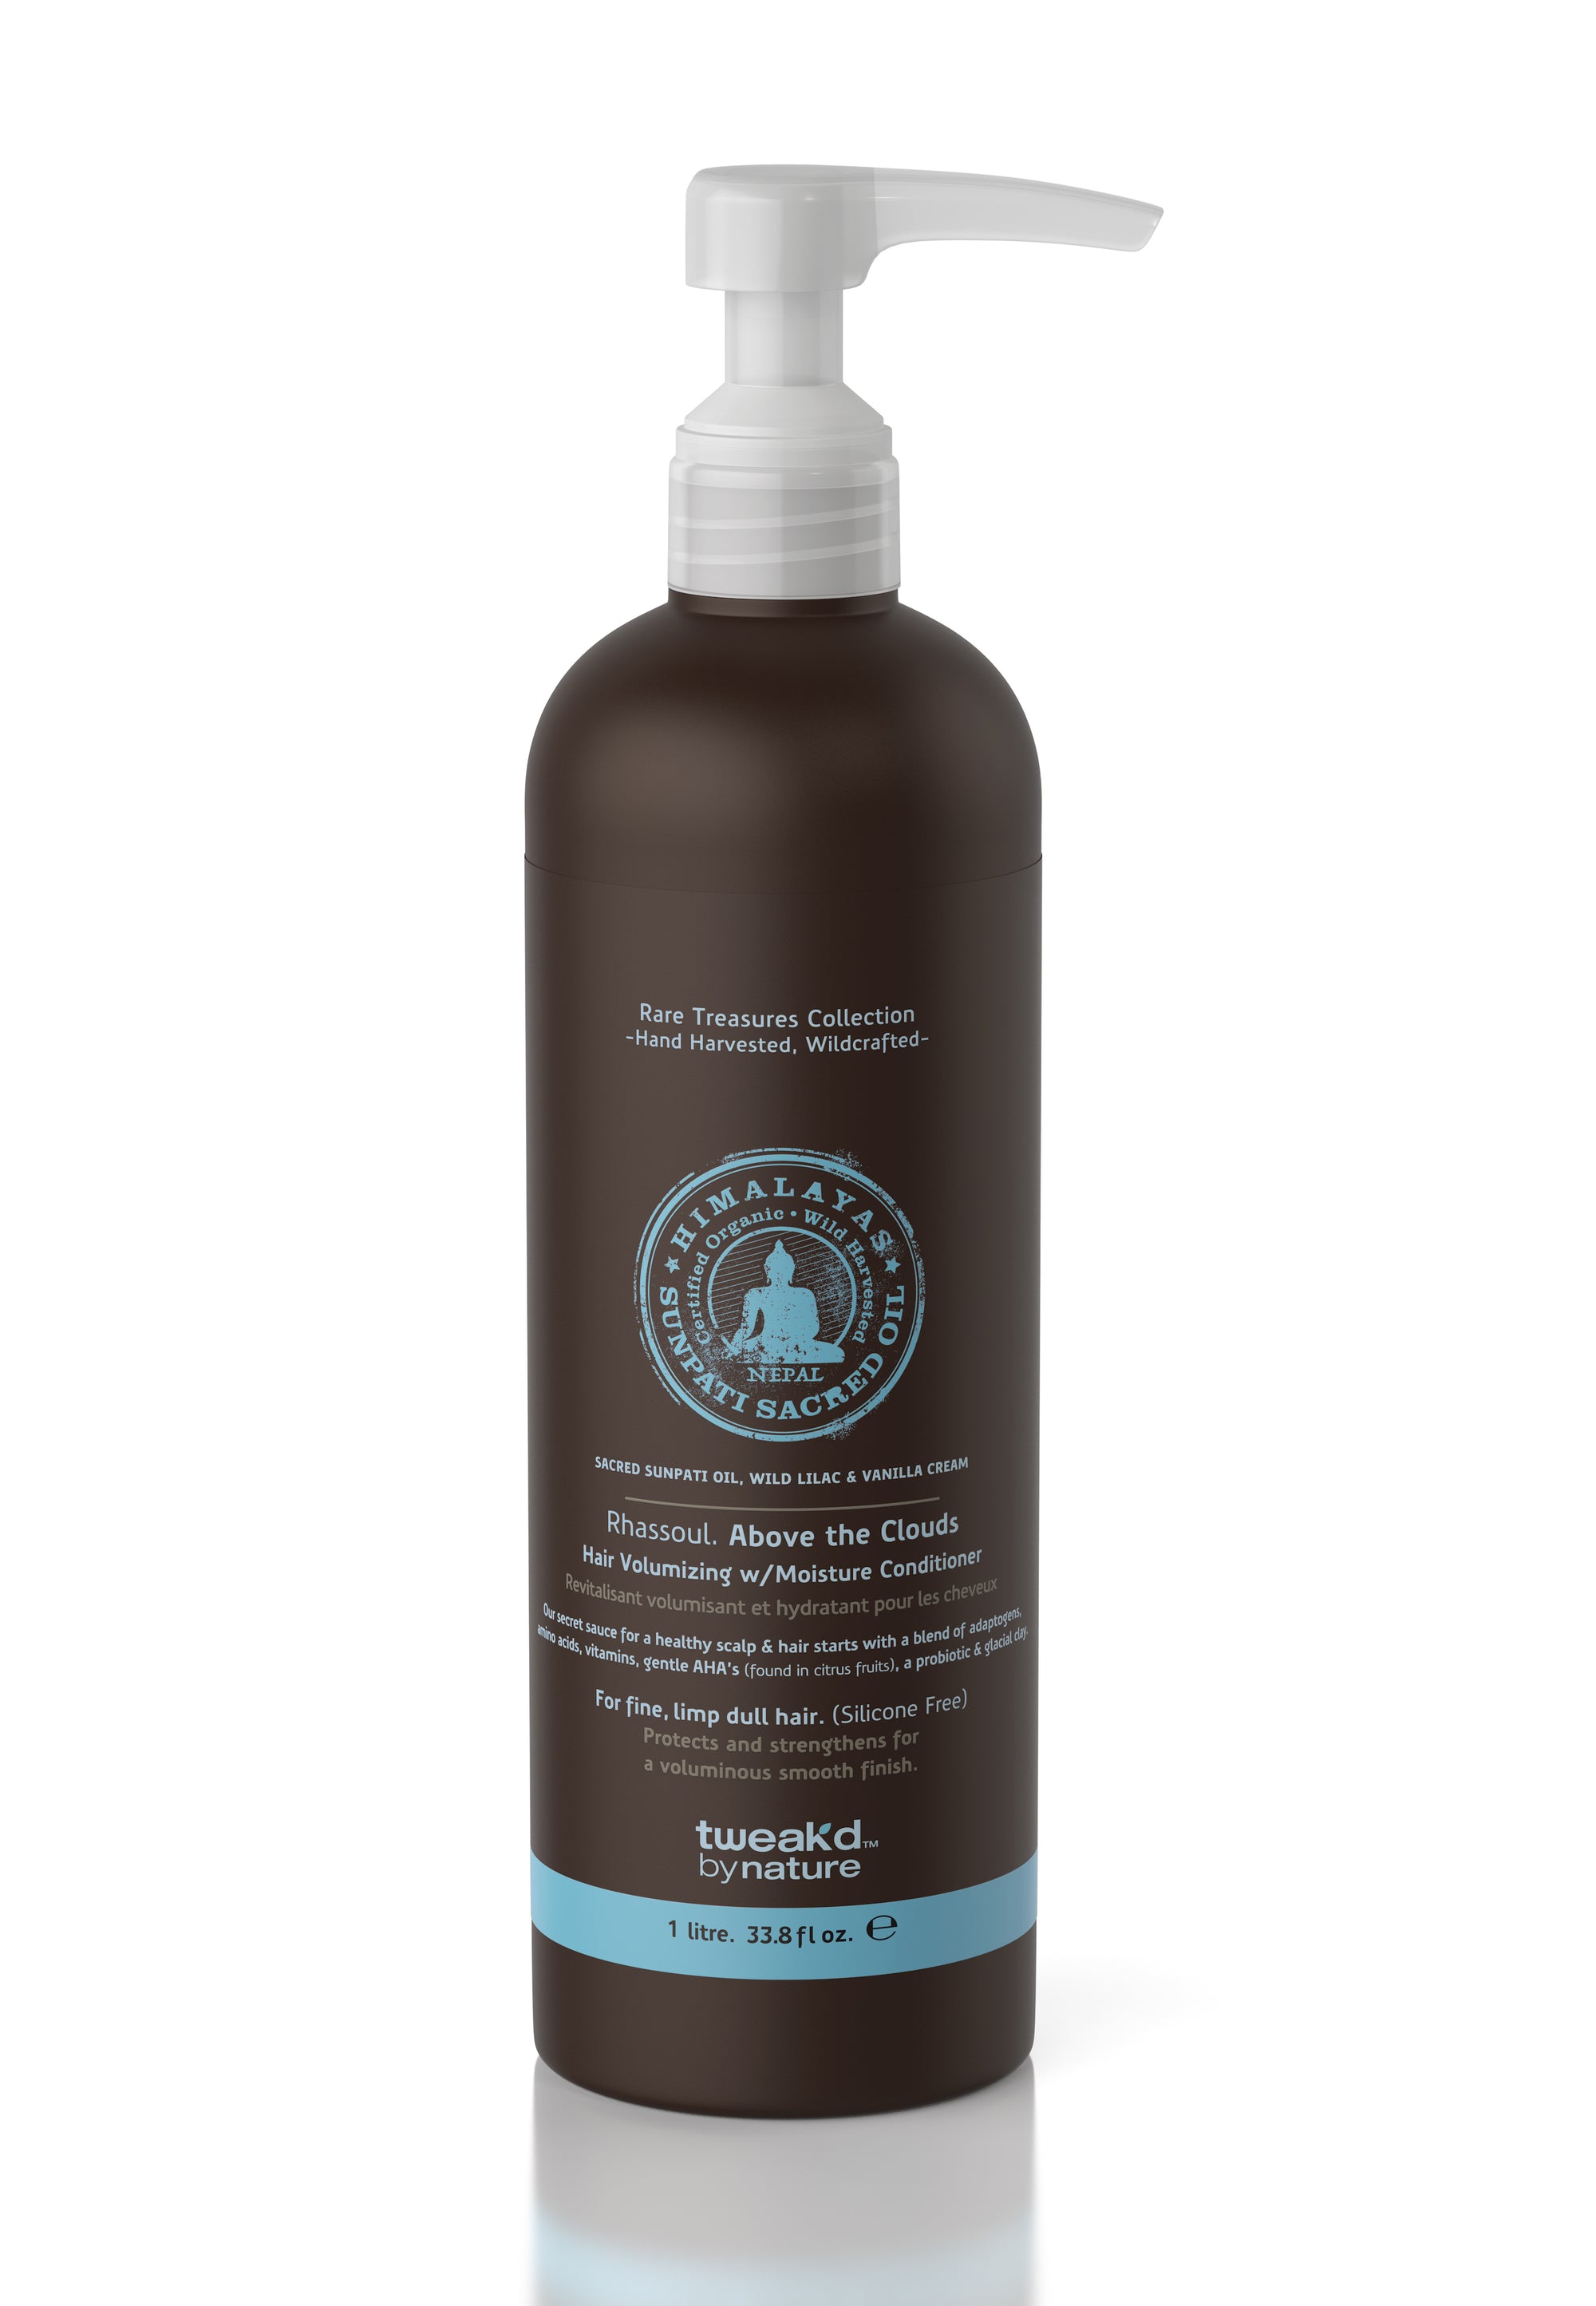 Tweak'd By Nature Rhassoul Above the Clouds Hair Volumising Conditioner 1 Litre (33.8fl.oz)